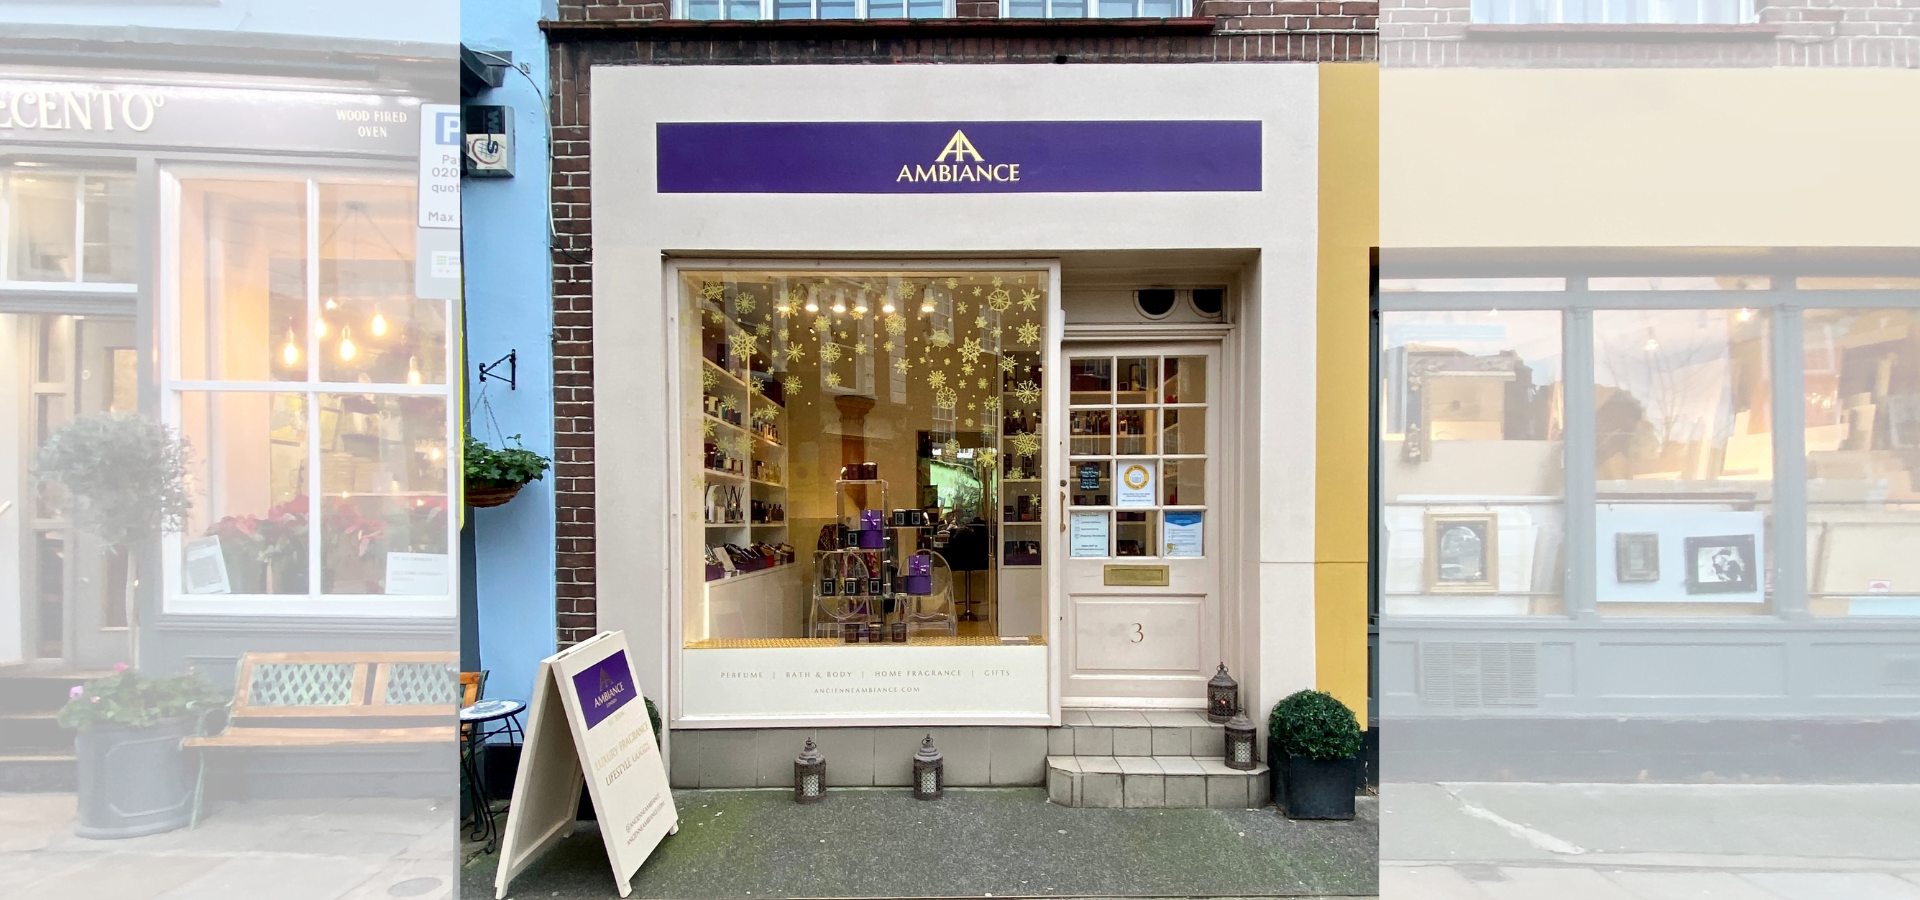 Ancienne Ambiance London 3 Cale Street Chelsea Green SW3 - luxury fragrance and lifestyle goods